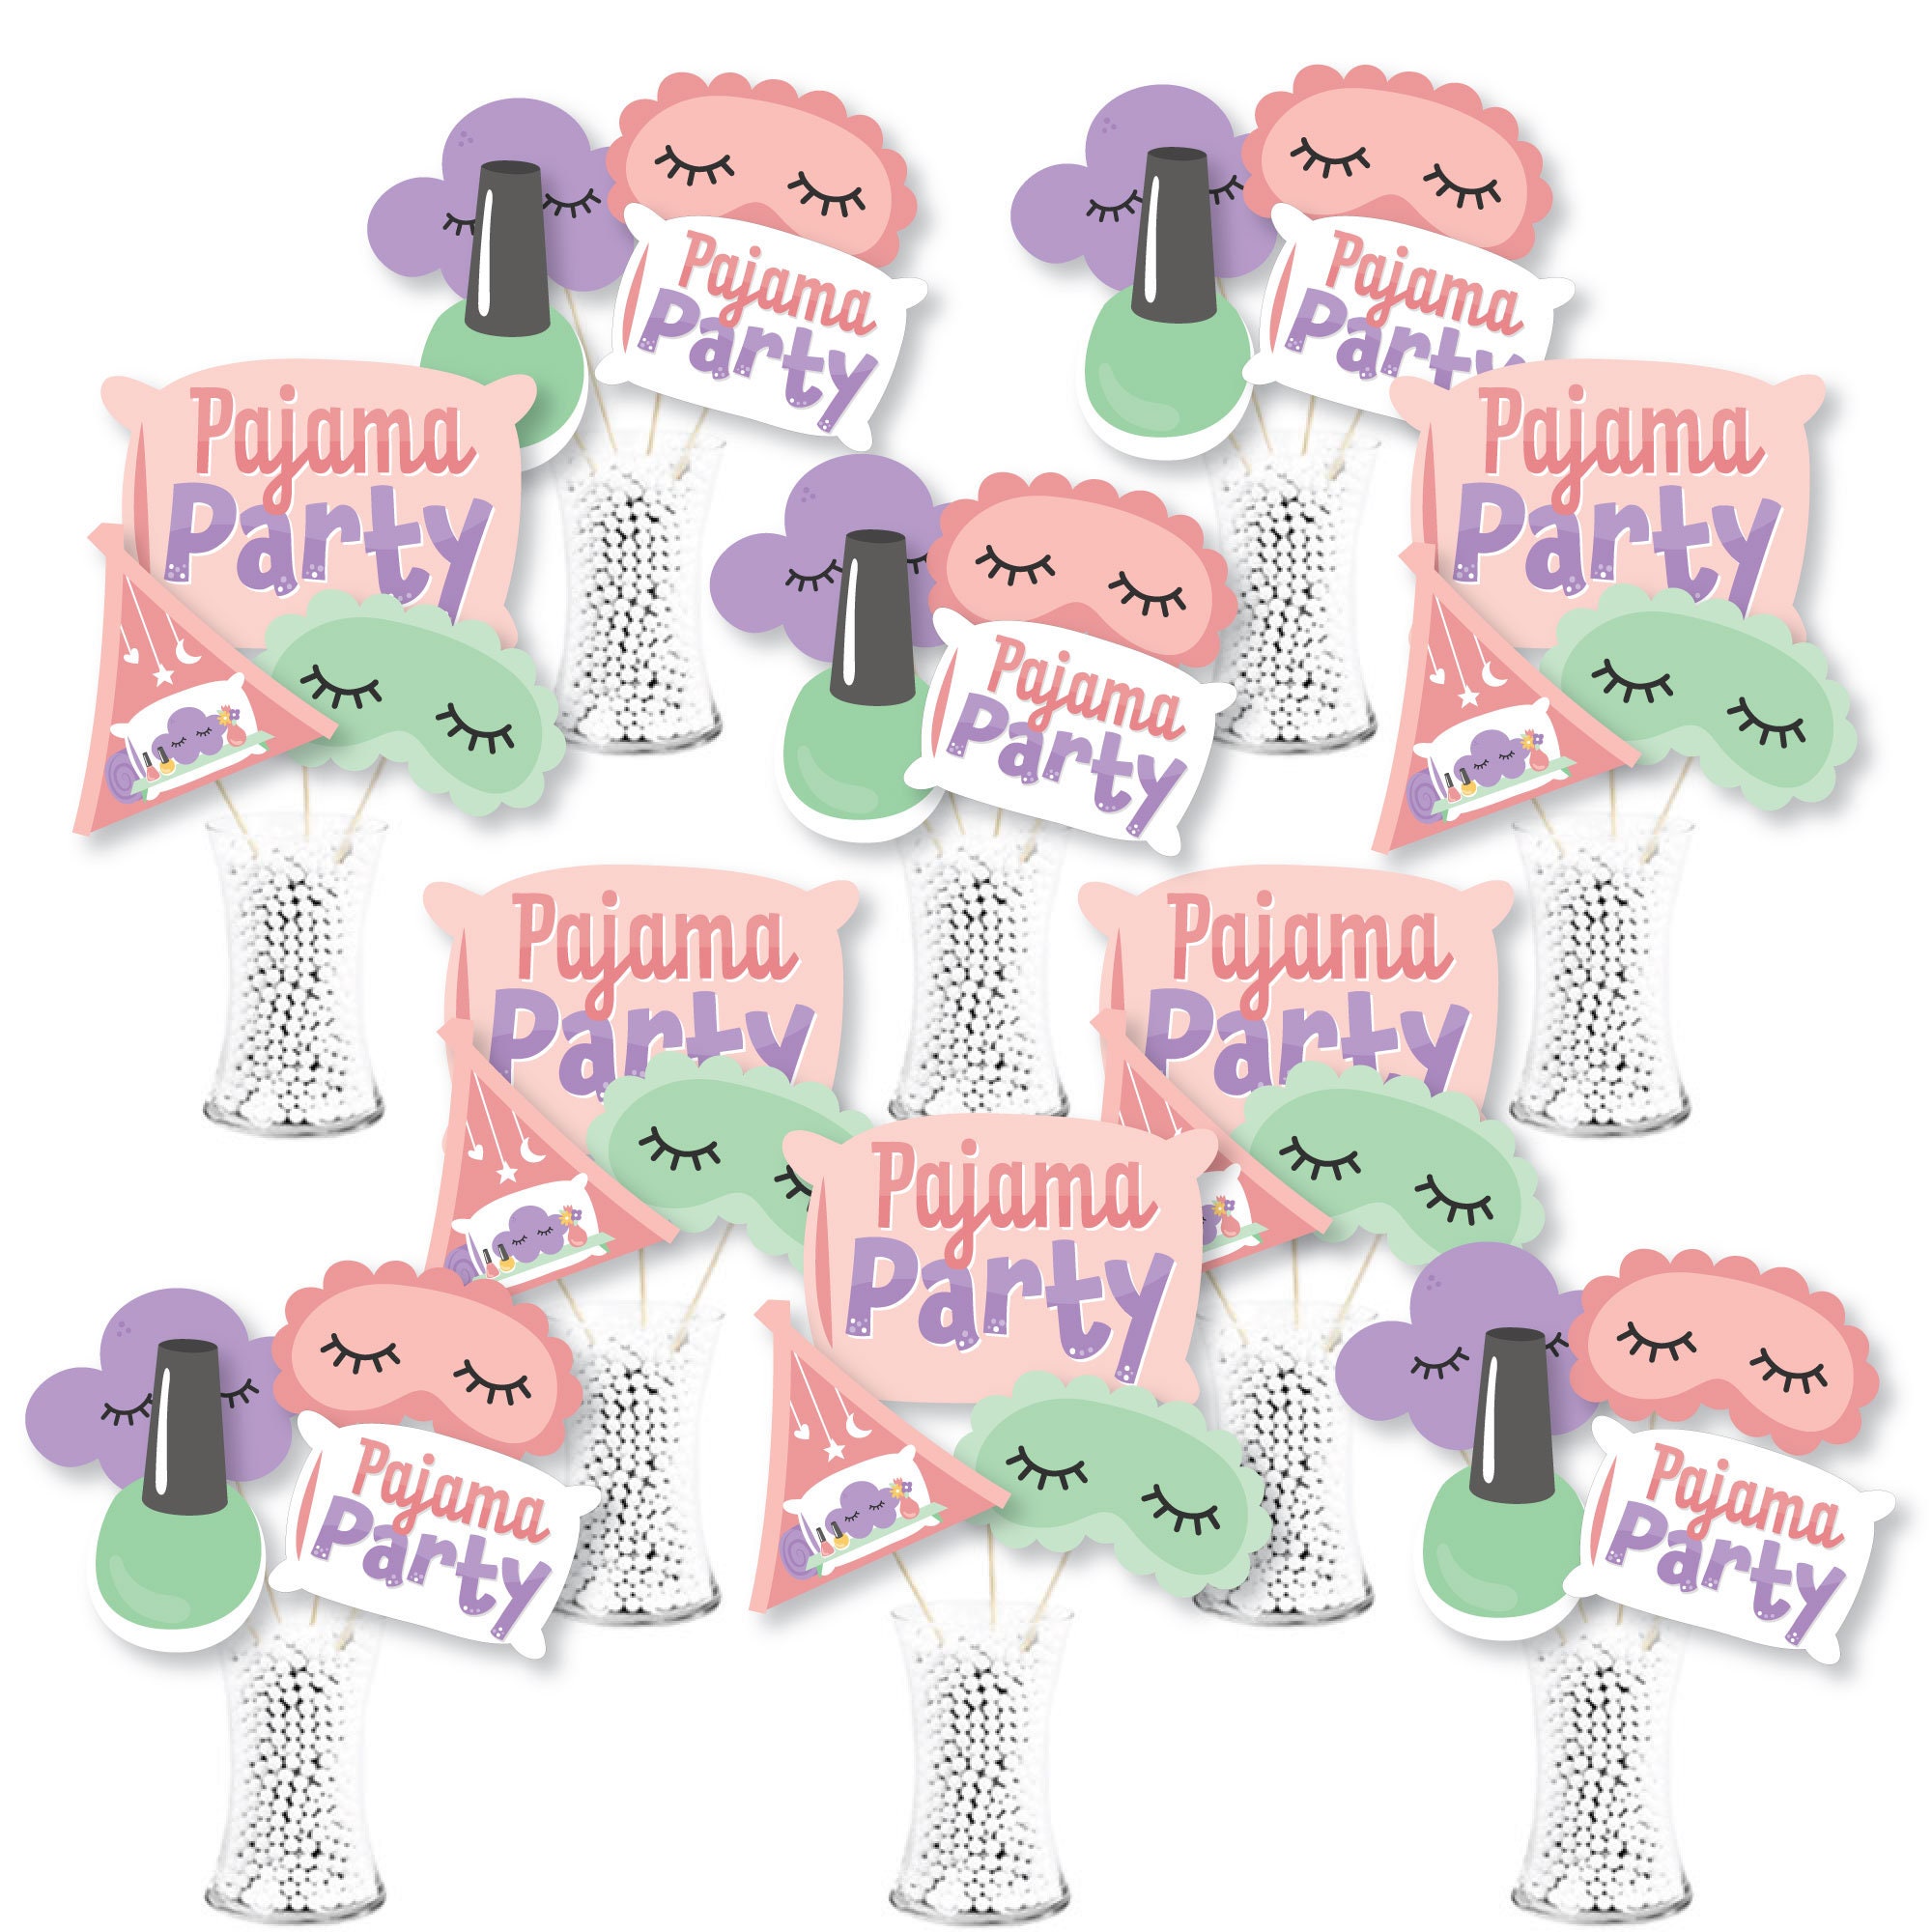 HAKOTI Slumber Party Decorations,142Pcs Pajama Party Sleepover Tableware Include Sleepover Plates Cups Banner and Plastic Slumber Tablecloth for Girls